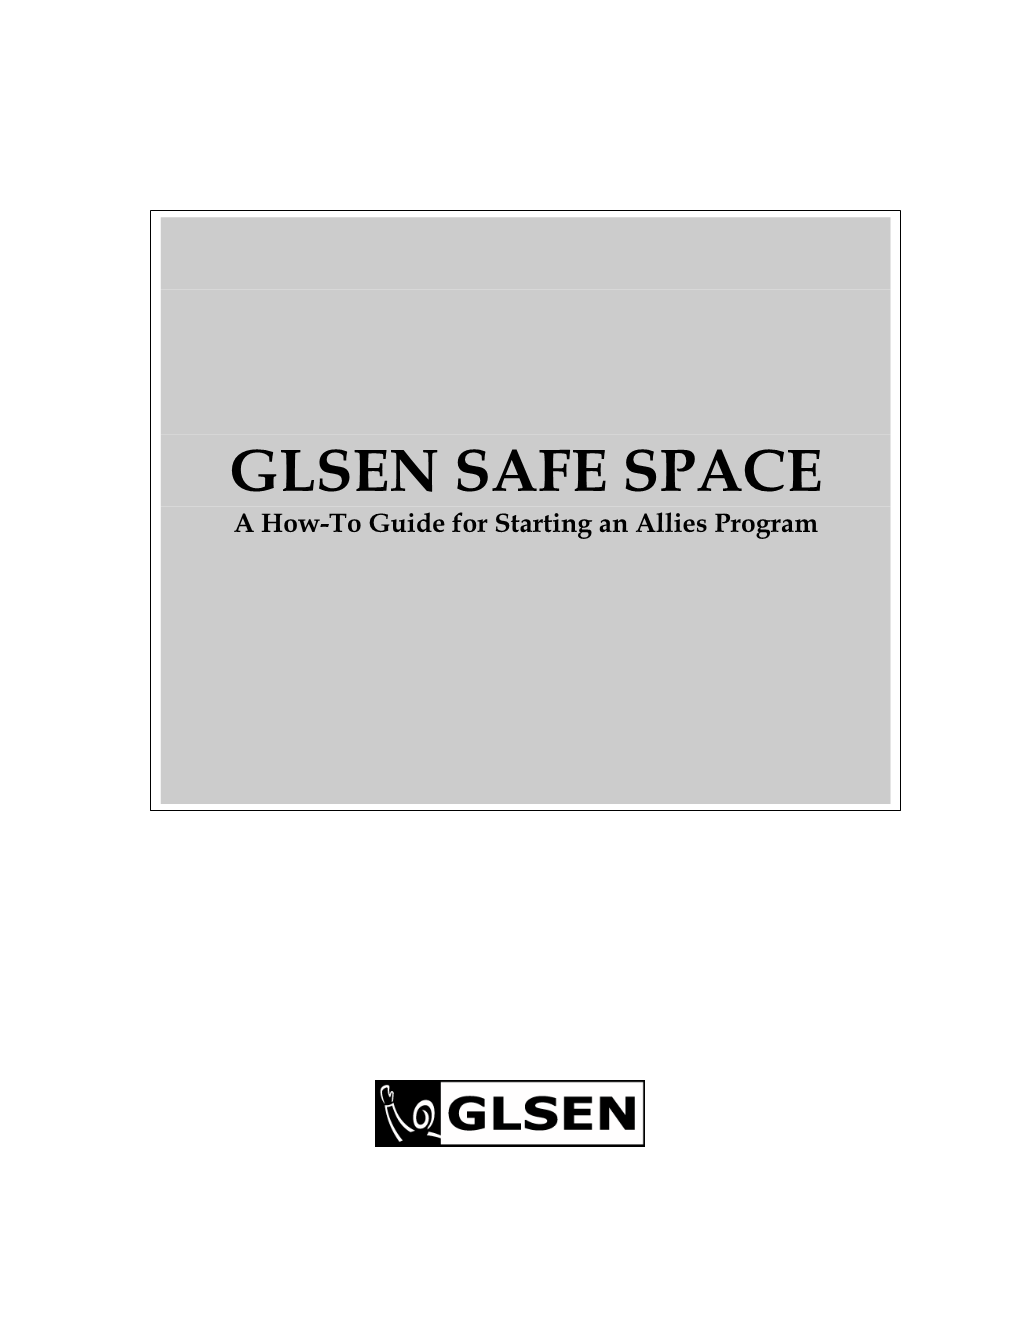 GLSEN Safe Space: a How-To Guide for Starting an Allies Program